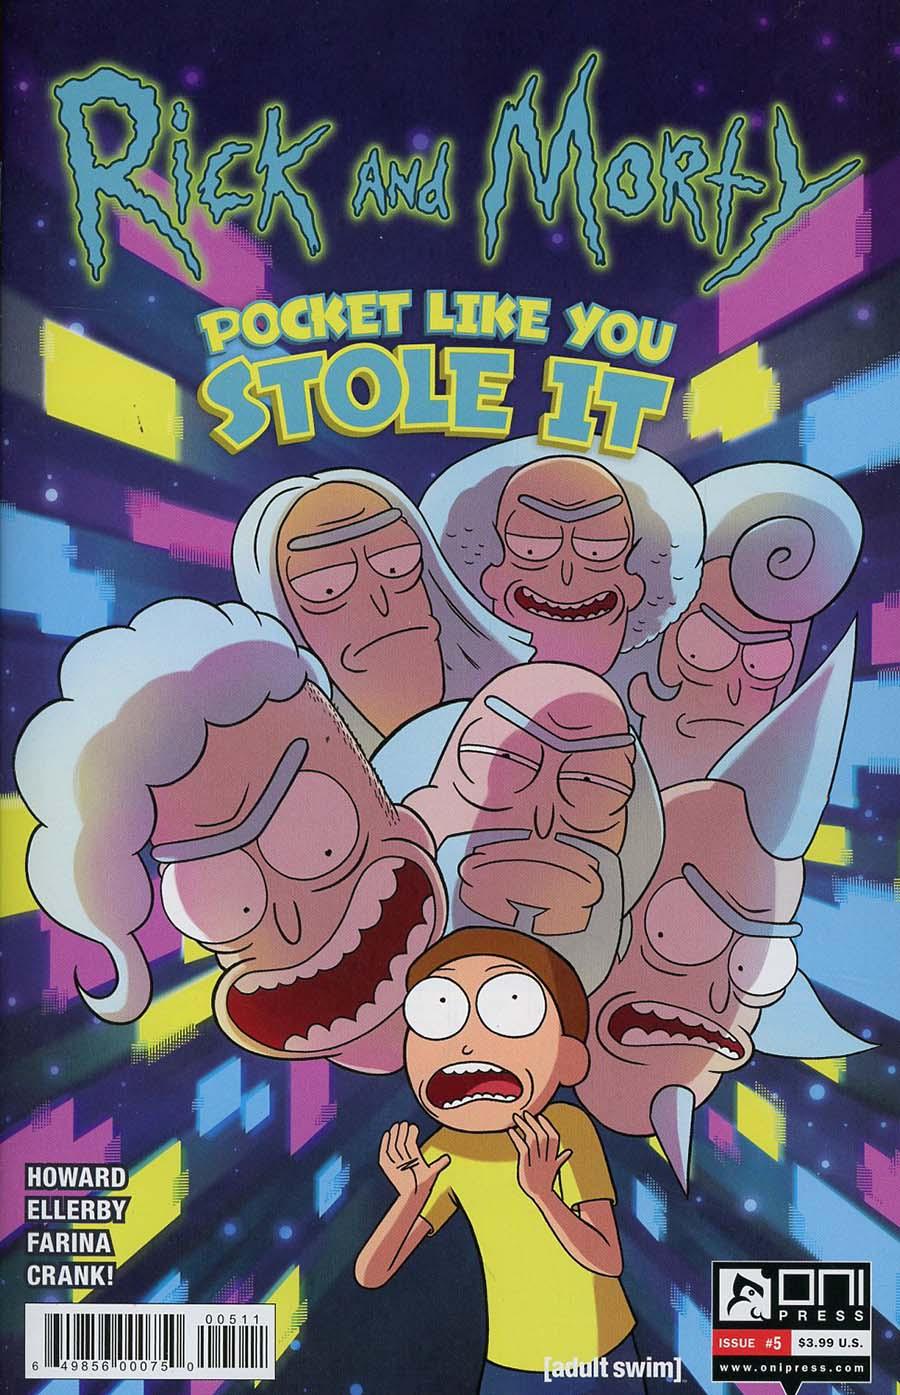 Rick And Morty Pocket Like You Stole It Vol. 1 #5